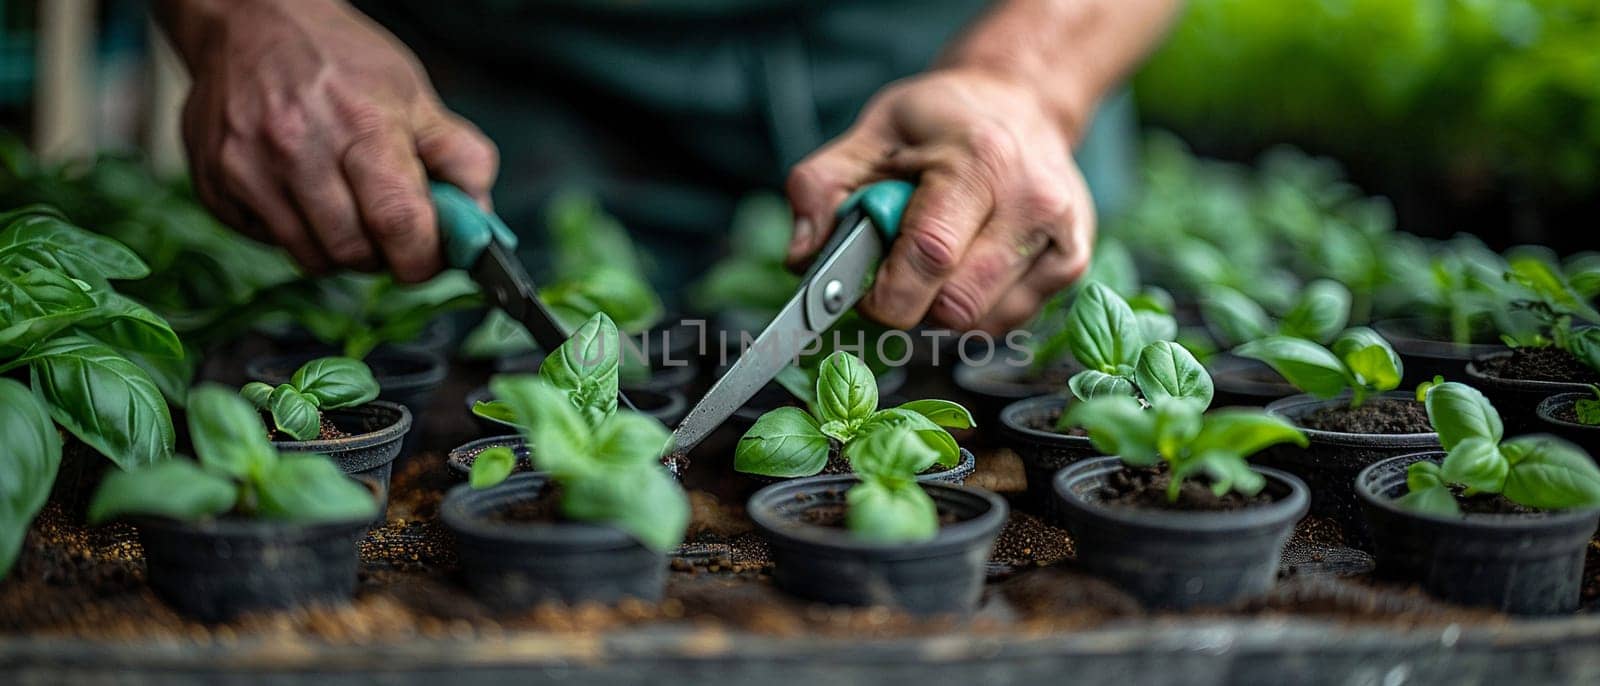 Garden Herb Nursery Seasons Culinary Arts in Business of Flavorful Horticulture, Garden shears and herb seedlings season a story of culinary arts and flavorful horticulture in the garden herb nursery business.